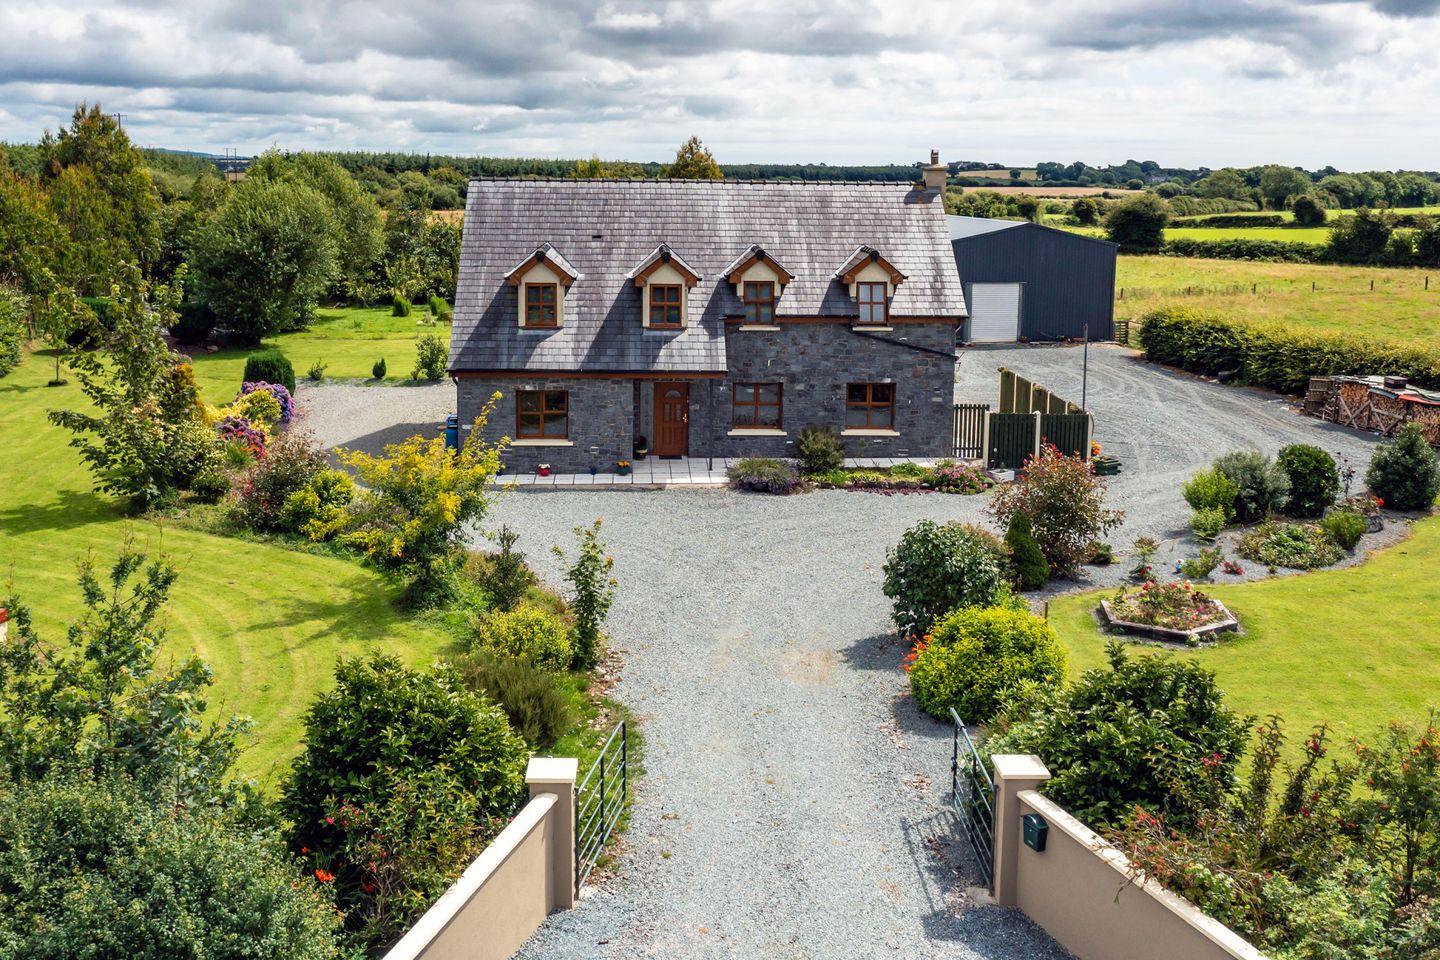 Coole On 9.5 Acres, Campile, Co. Wexford, Y34NP60